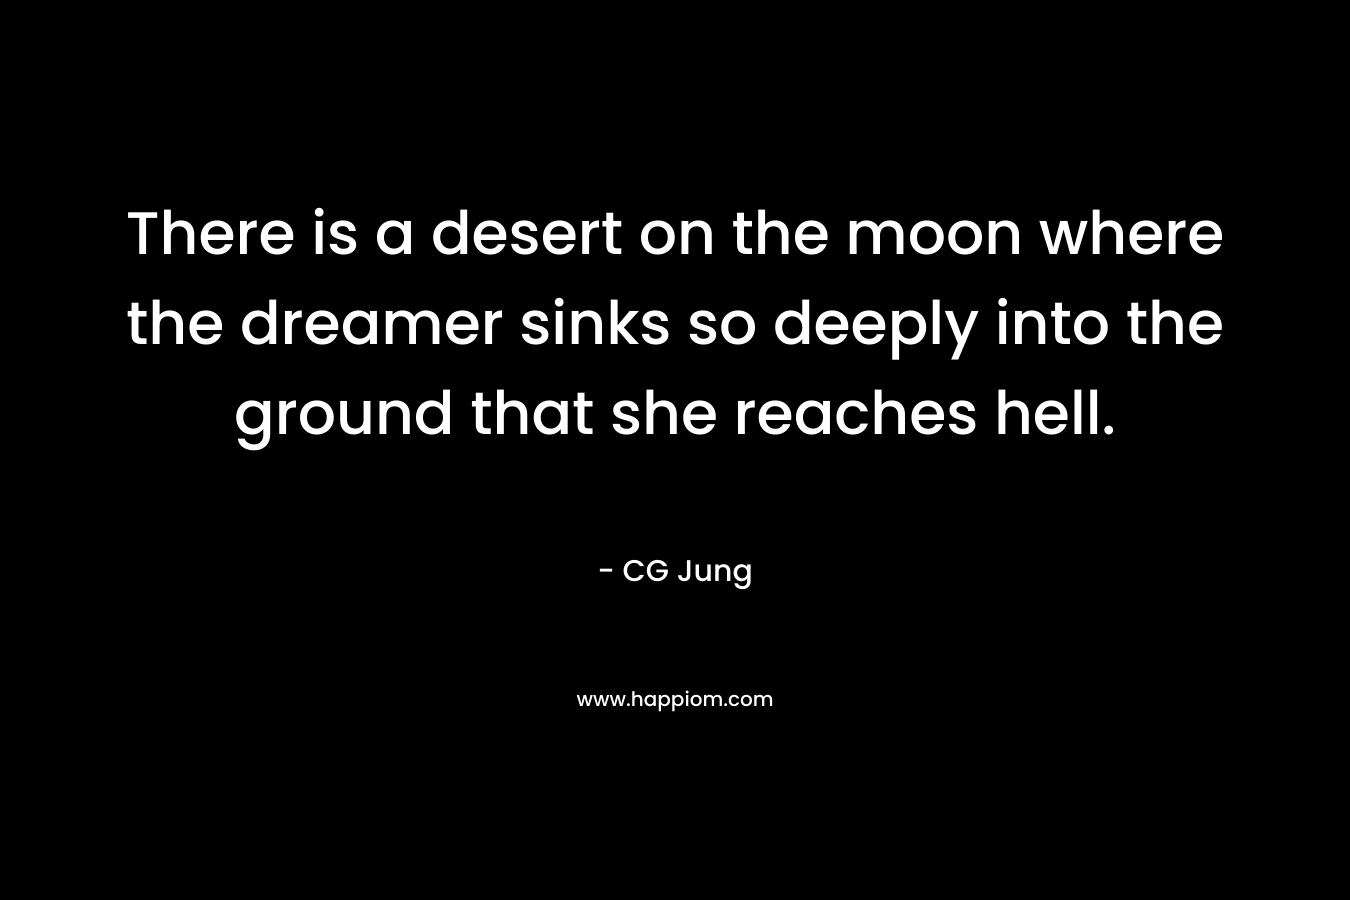 There is a desert on the moon where the dreamer sinks so deeply into the ground that she reaches hell. – CG Jung